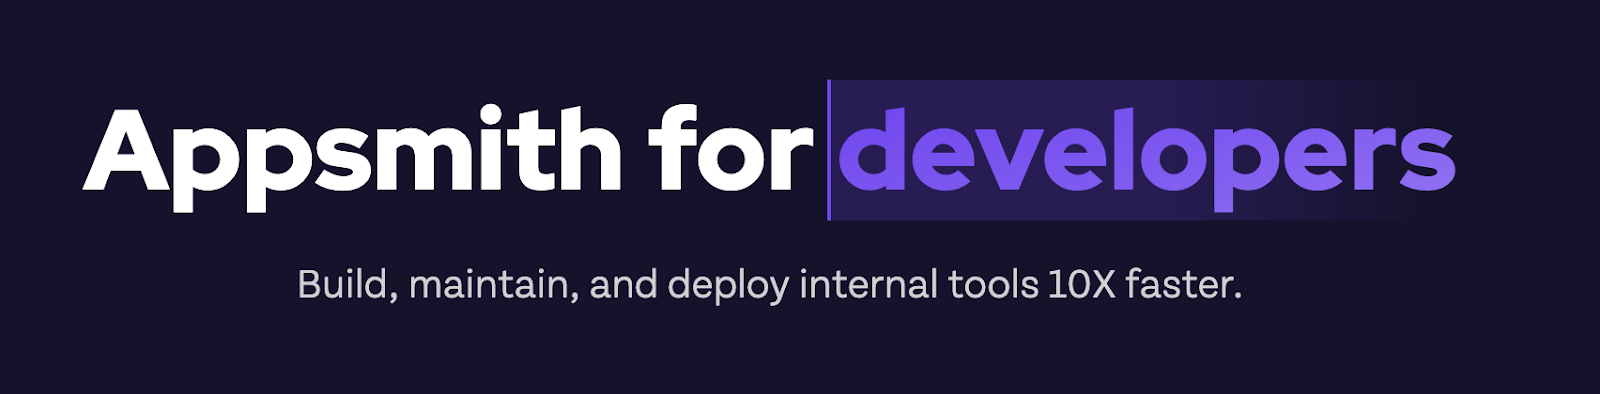 Text: "Appsmith for developers. Build, maintain and deploy internal tools 10X faster."